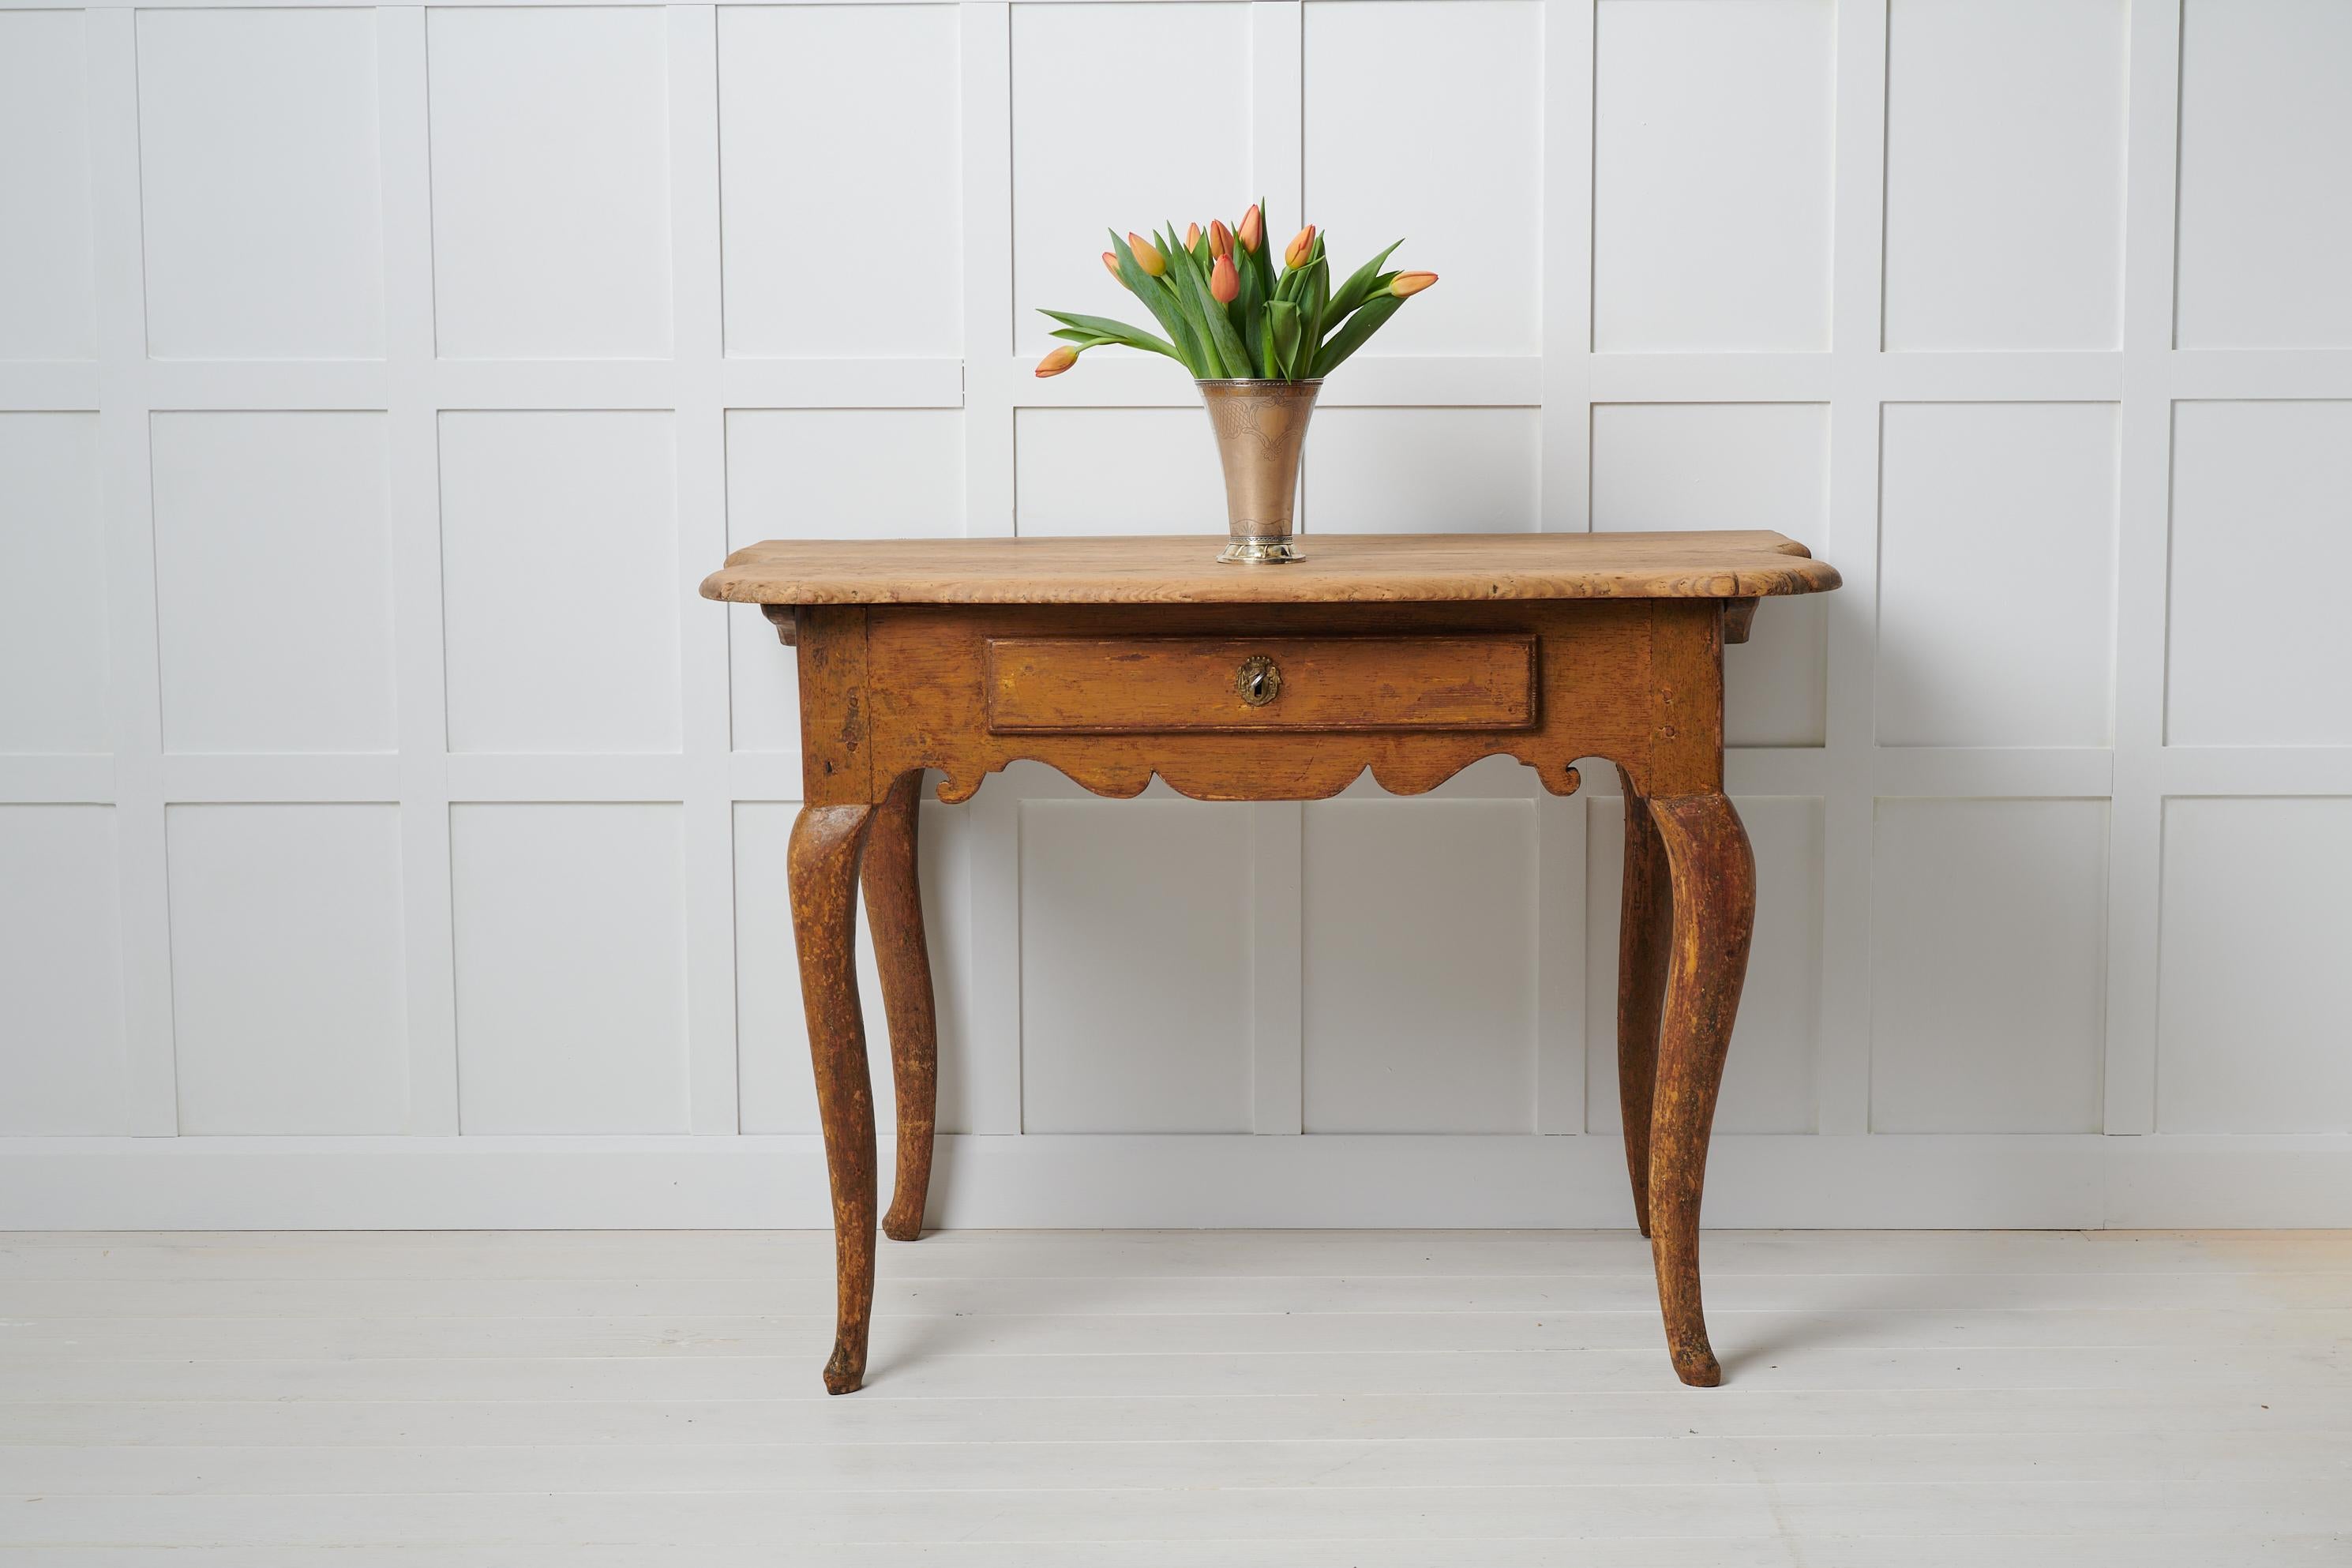 Rare antique baroque table from Sweden made during the mid to late 1700s, around 1770. The table is a wall table and is made in pine with a single drawer in the apron. The table top of the table has a decorative shape with curved sides and profiled